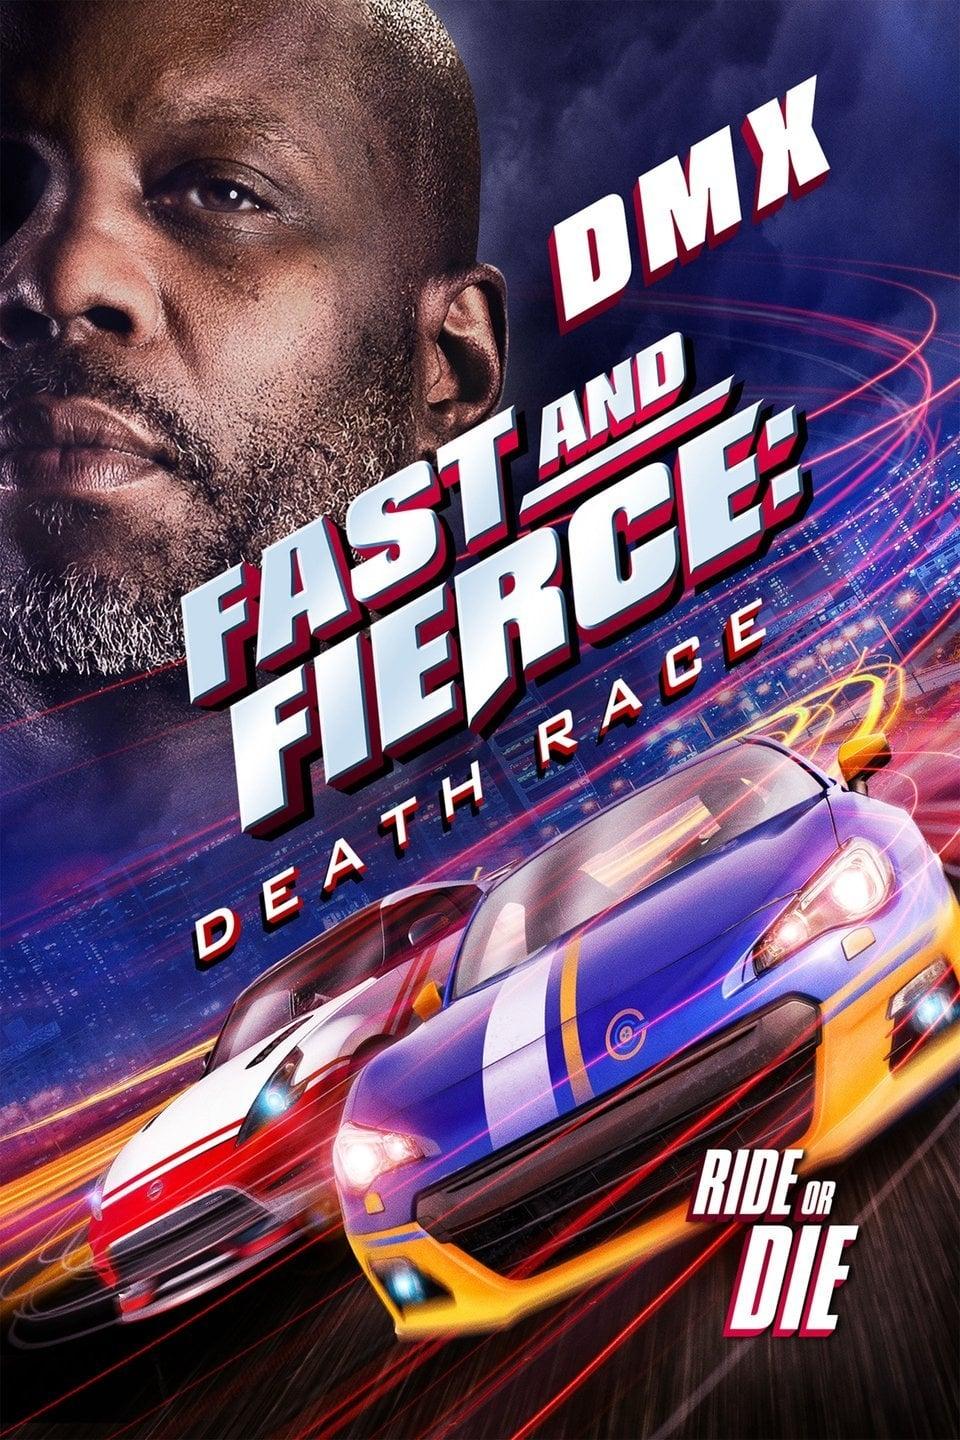 Fast and Fierce: Death Race poster